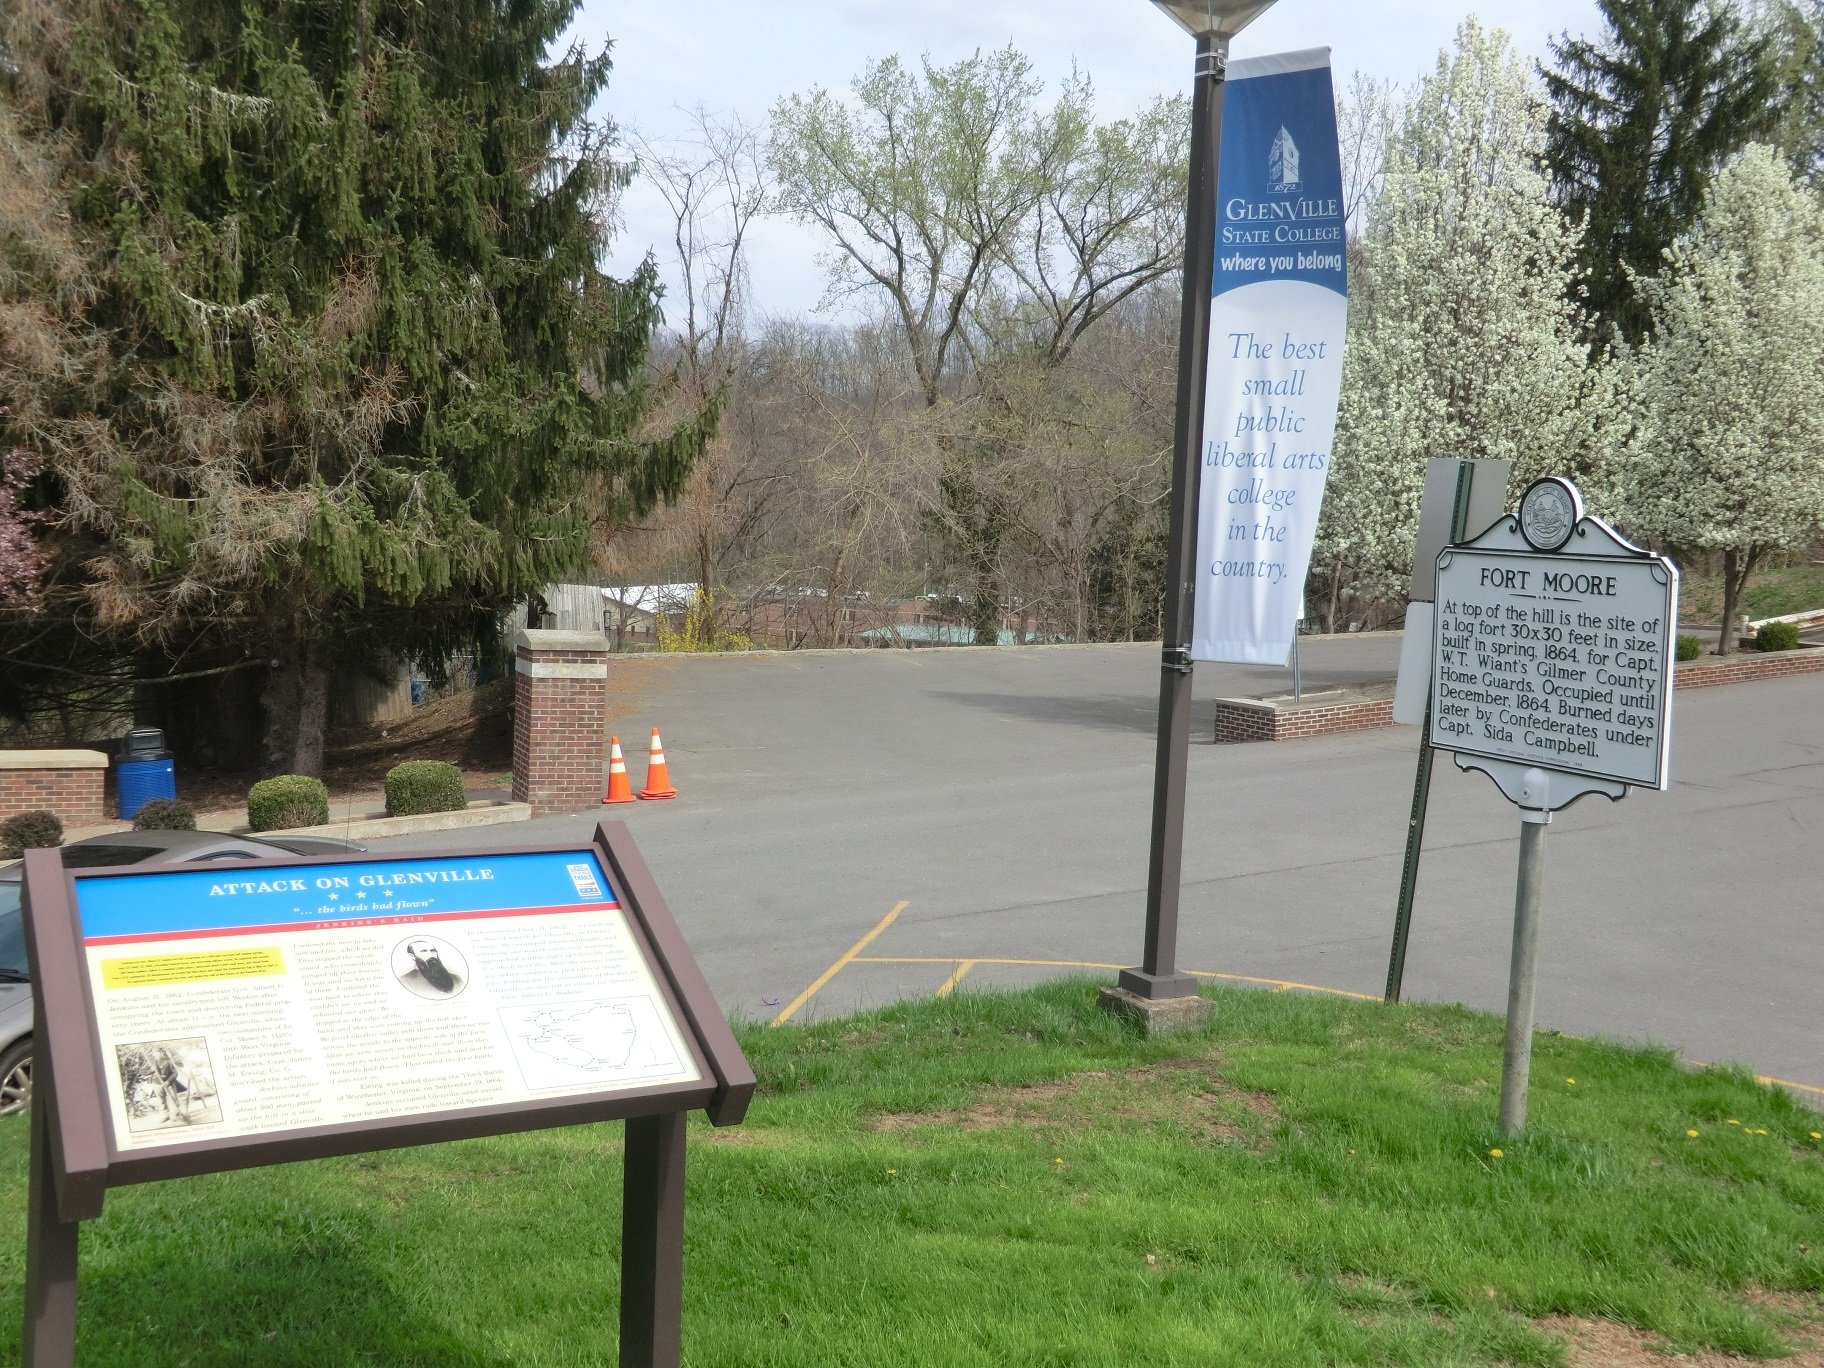 Attack on Glenville Marker,located on the campus of Glenville State College